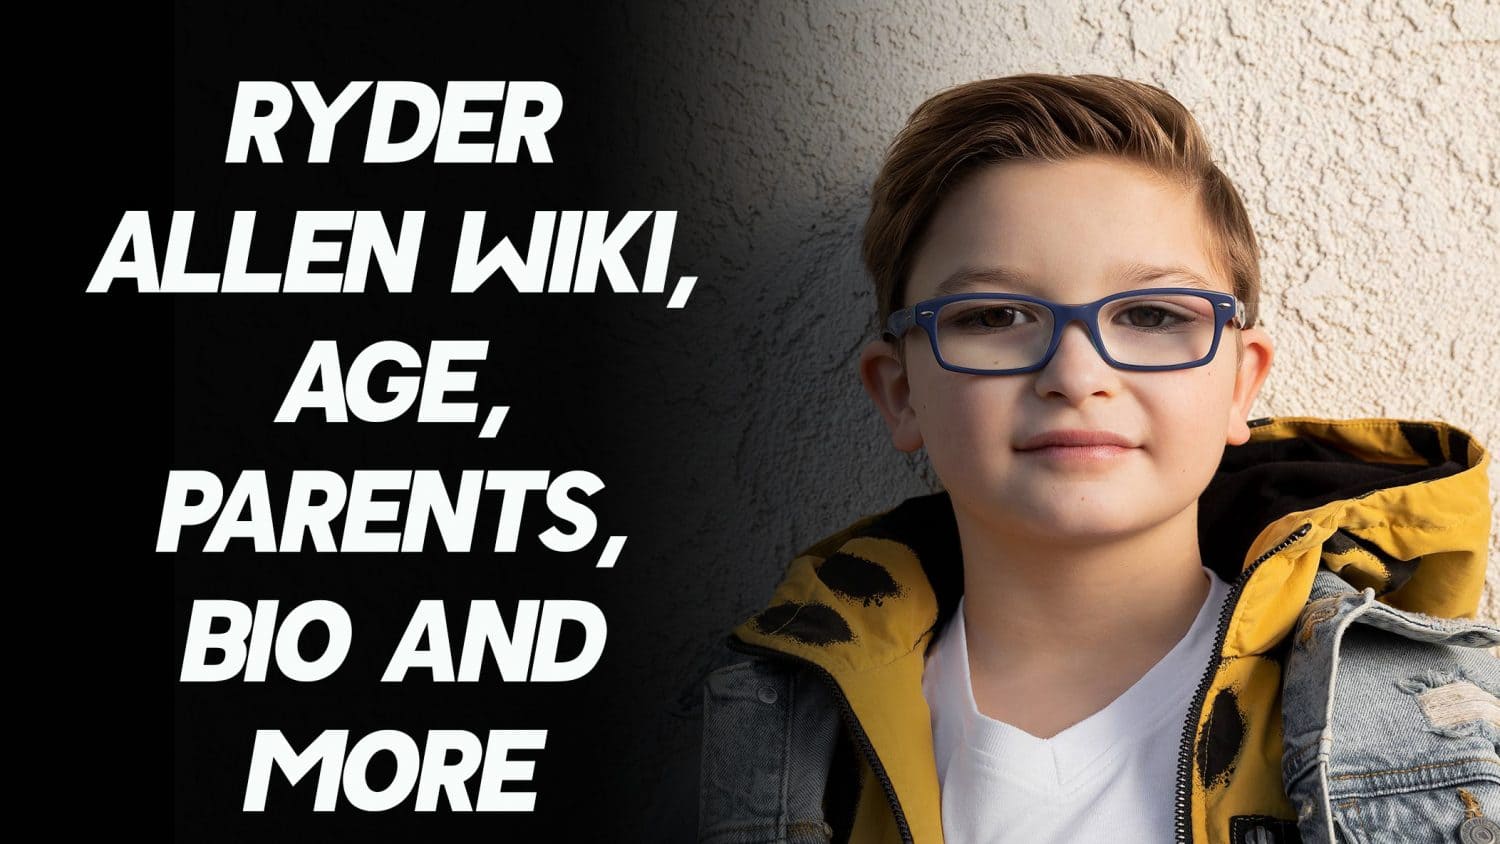 Ryder Allen Wiki, Age, Parents, Education, Family & More 1